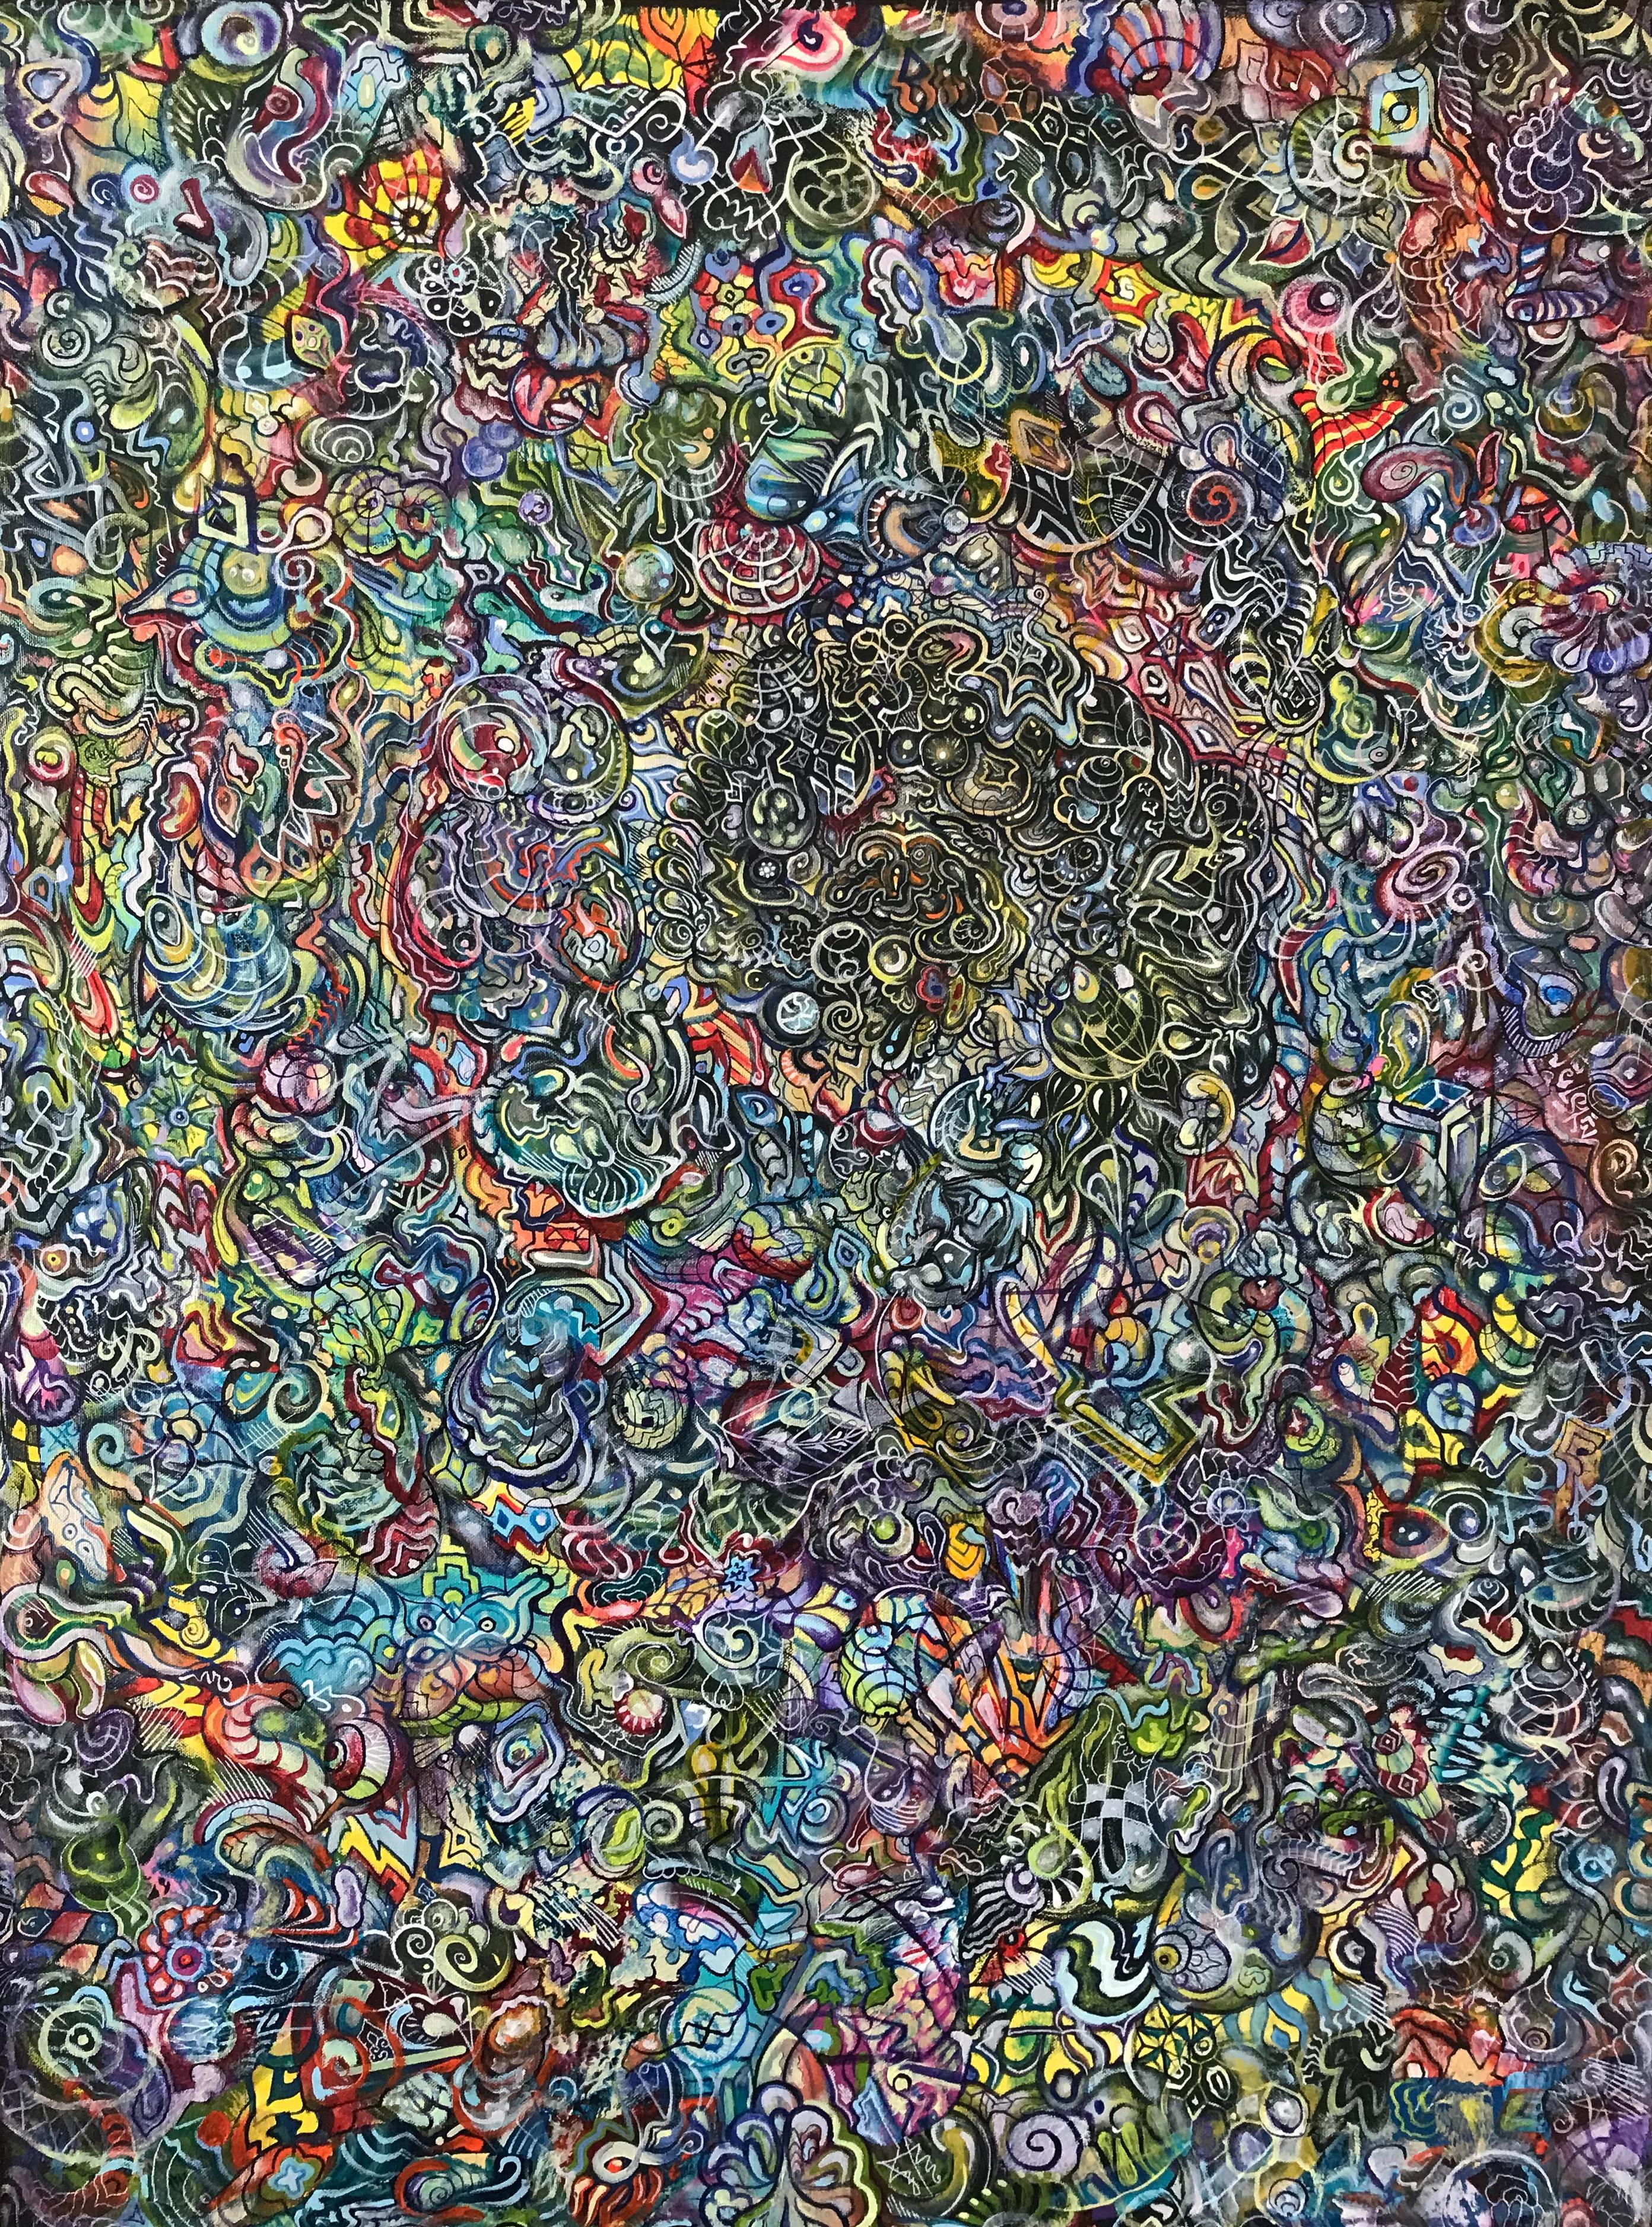 Ethan Meyer Abstract Painting - "Time Dilation Effect", Abstract Acrylic Painting on Canvas, Colorful, Patterns